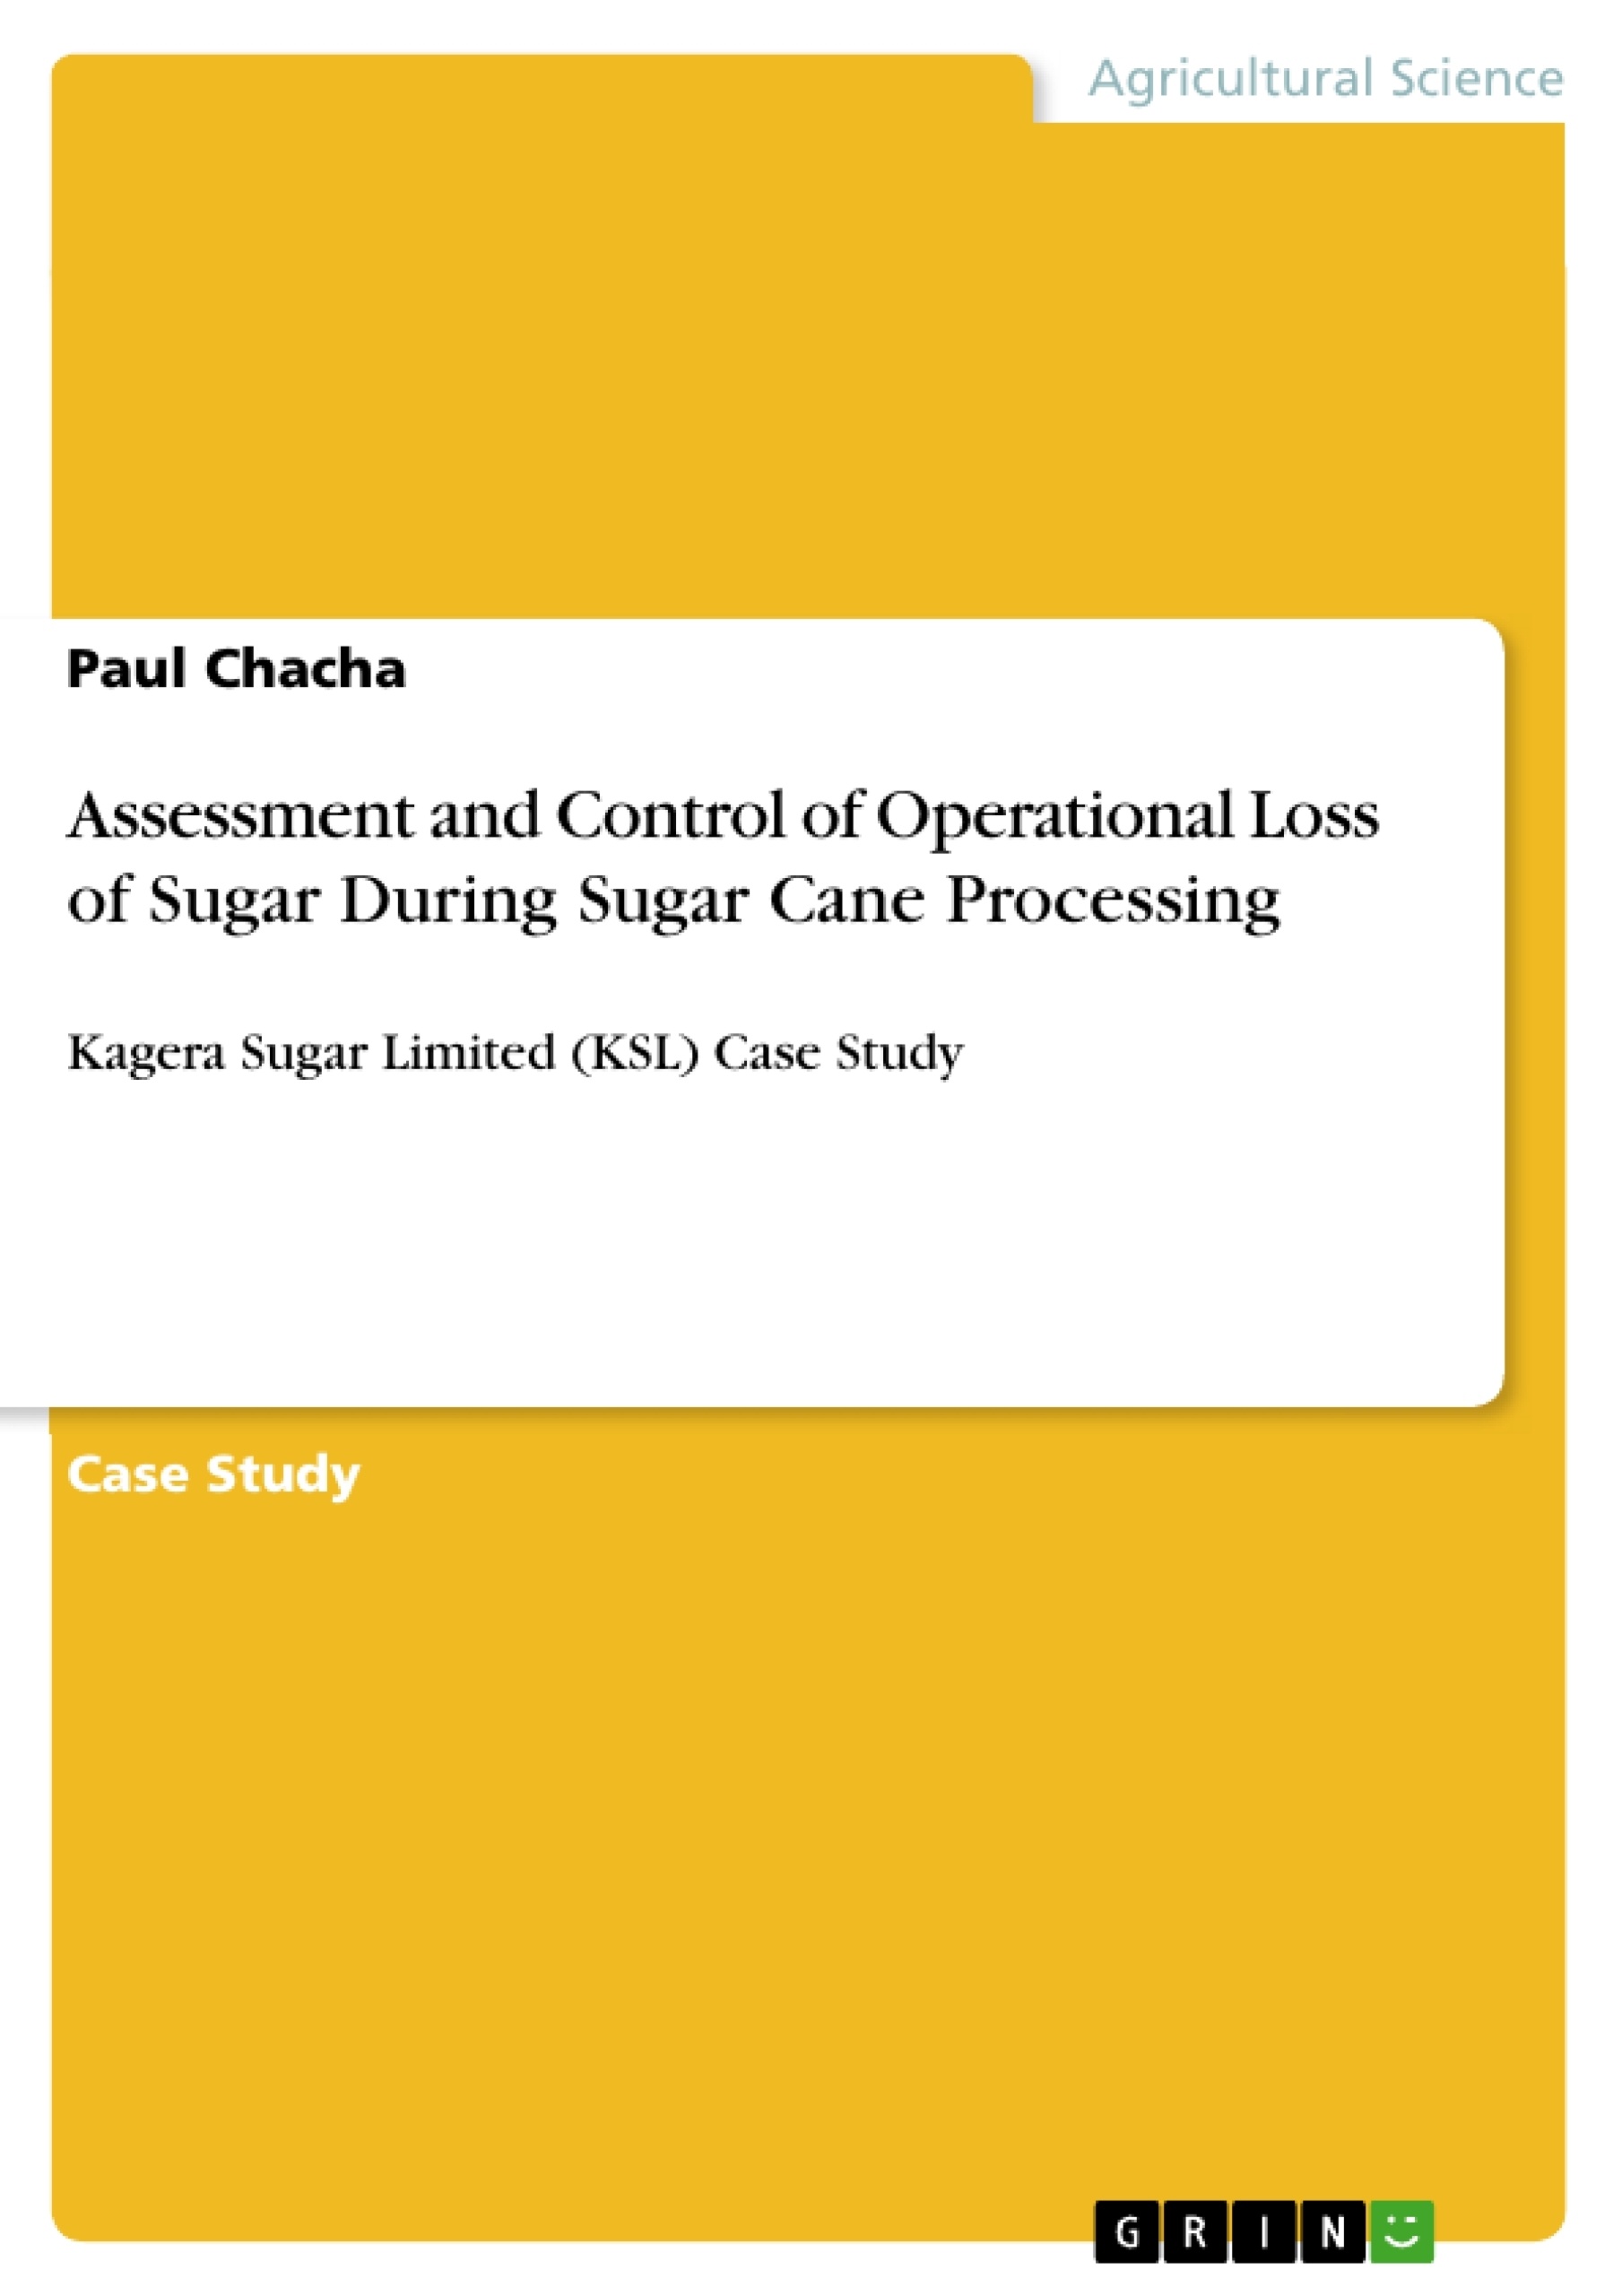 Titre: Assessment and Control of Operational Loss of Sugar During Sugar Cane Processing